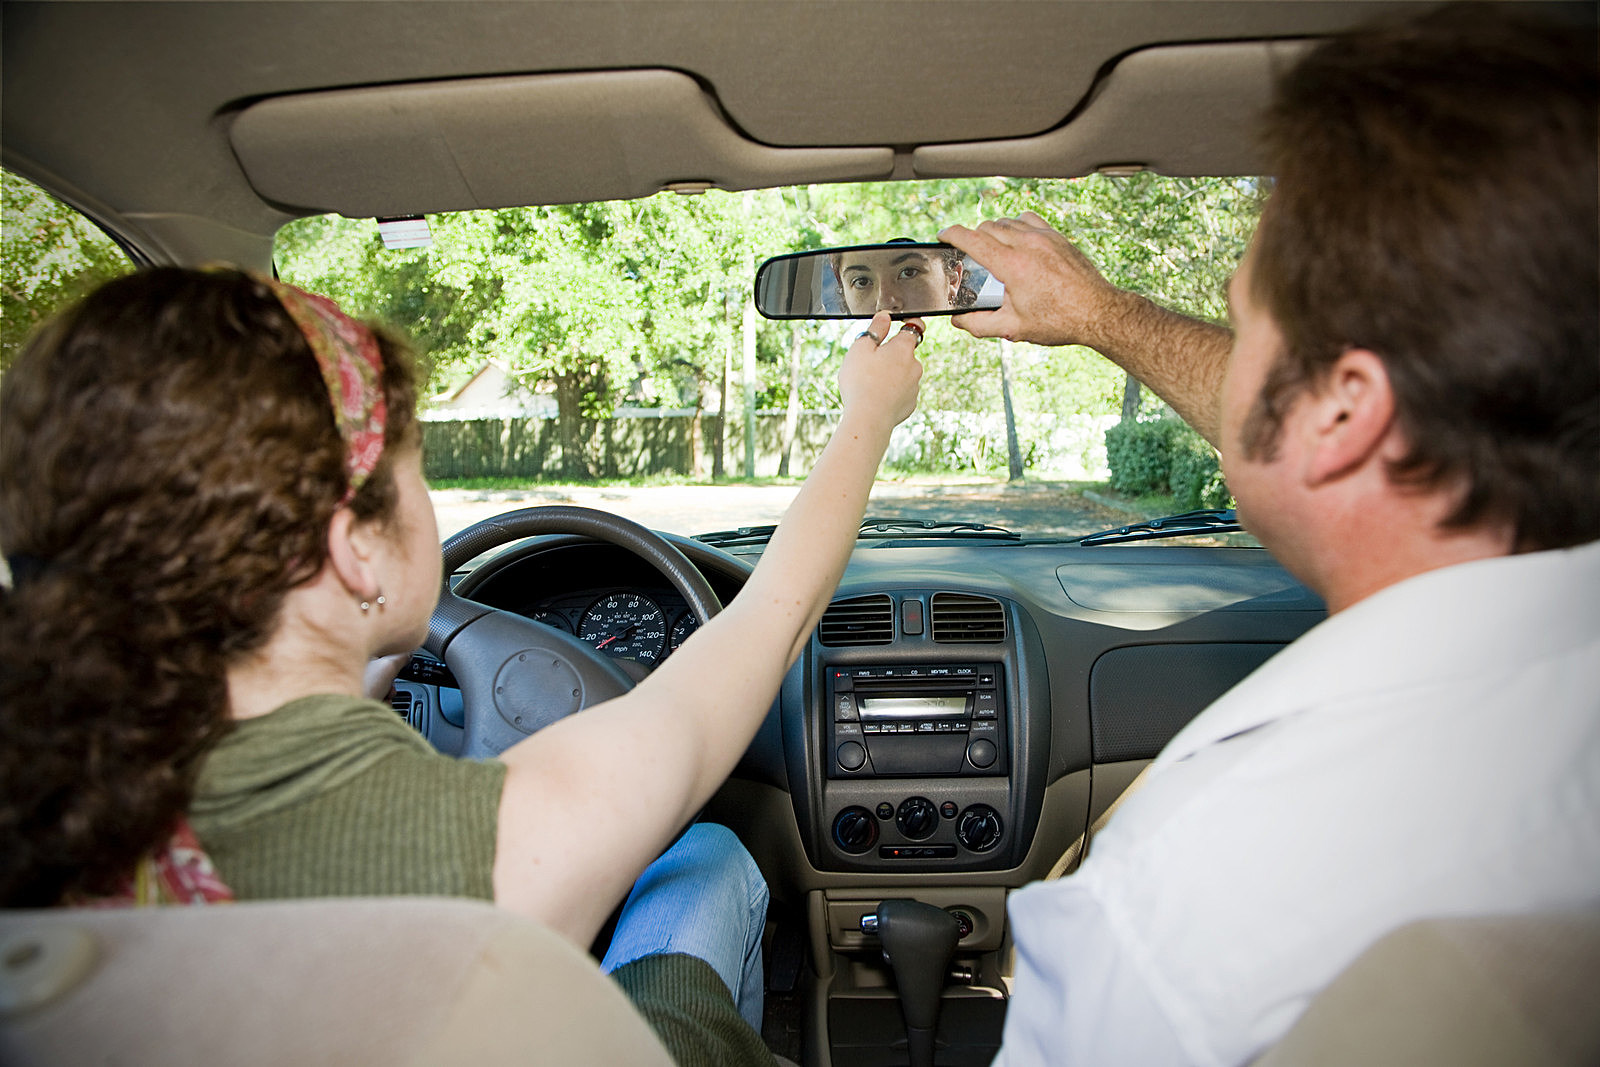 Hanging Items From Your Rearview Mirror - Legal Or Not?